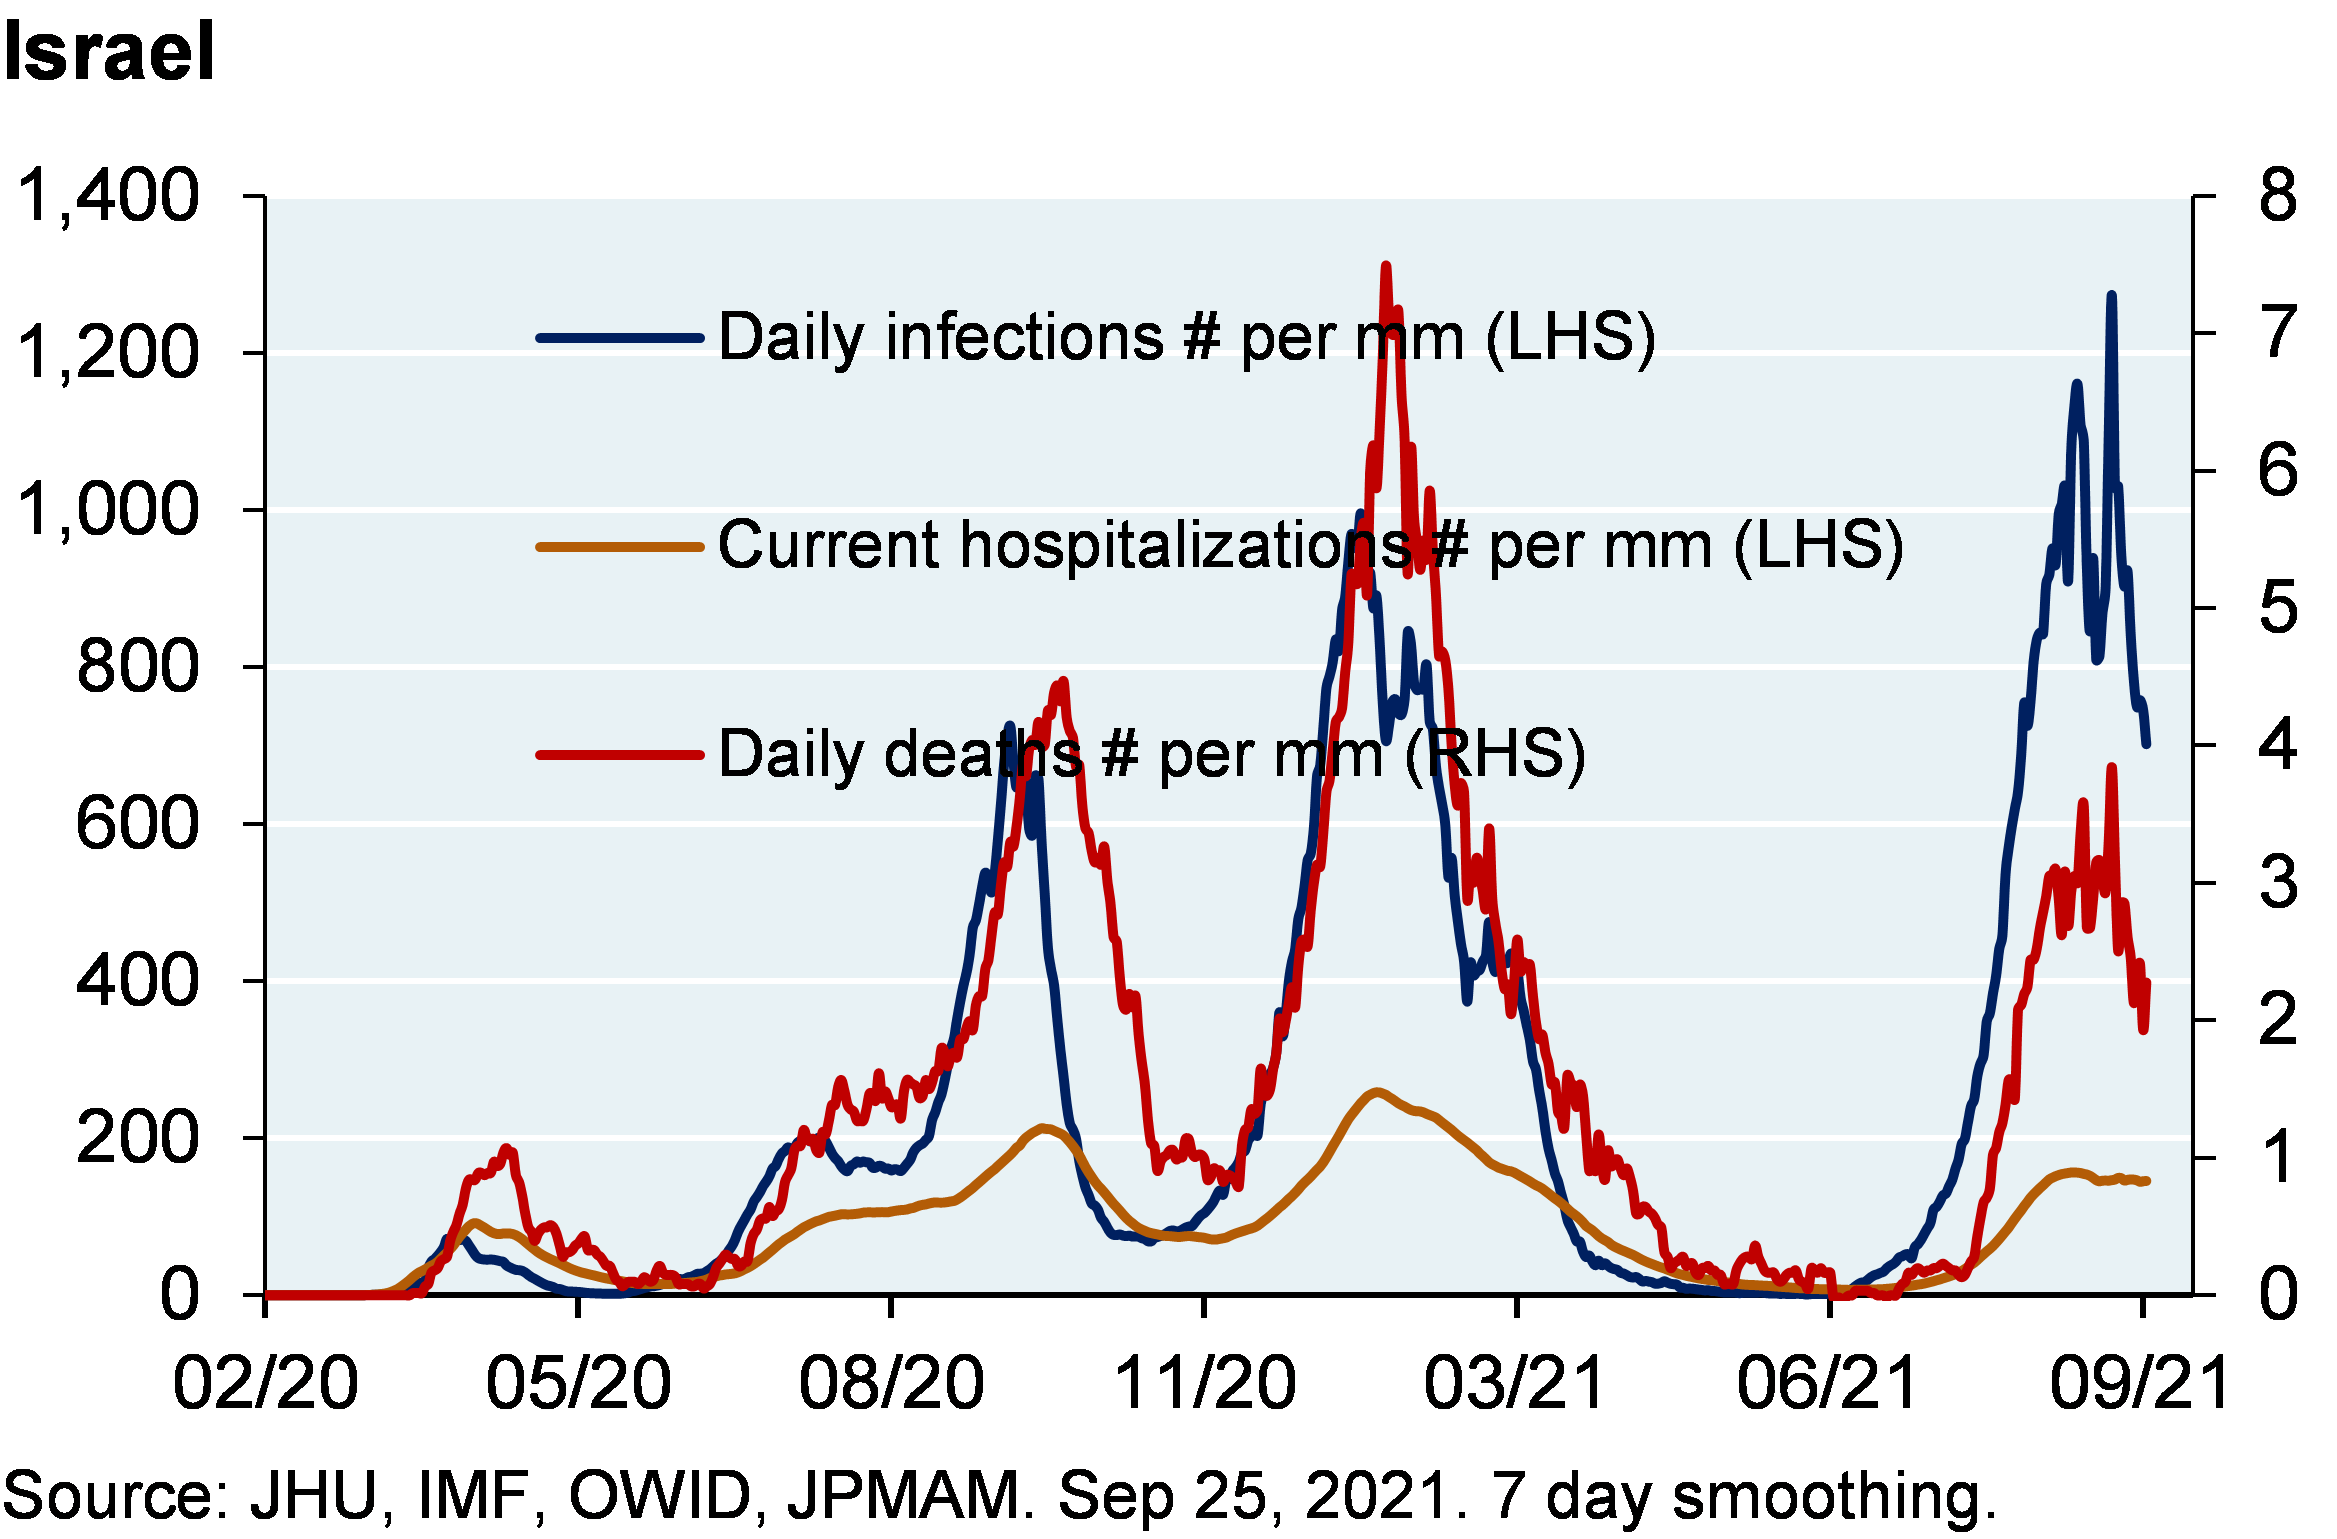 30.	Line chart shows daily infections per million, current hospitalizations and daily deaths per million for Israel. The COVID surge in Israel has been higher than anticipated given Israel’s ~70% vaccination rate. Daily infections are just below 800 per mm and daily deaths are close to 2 per mm.